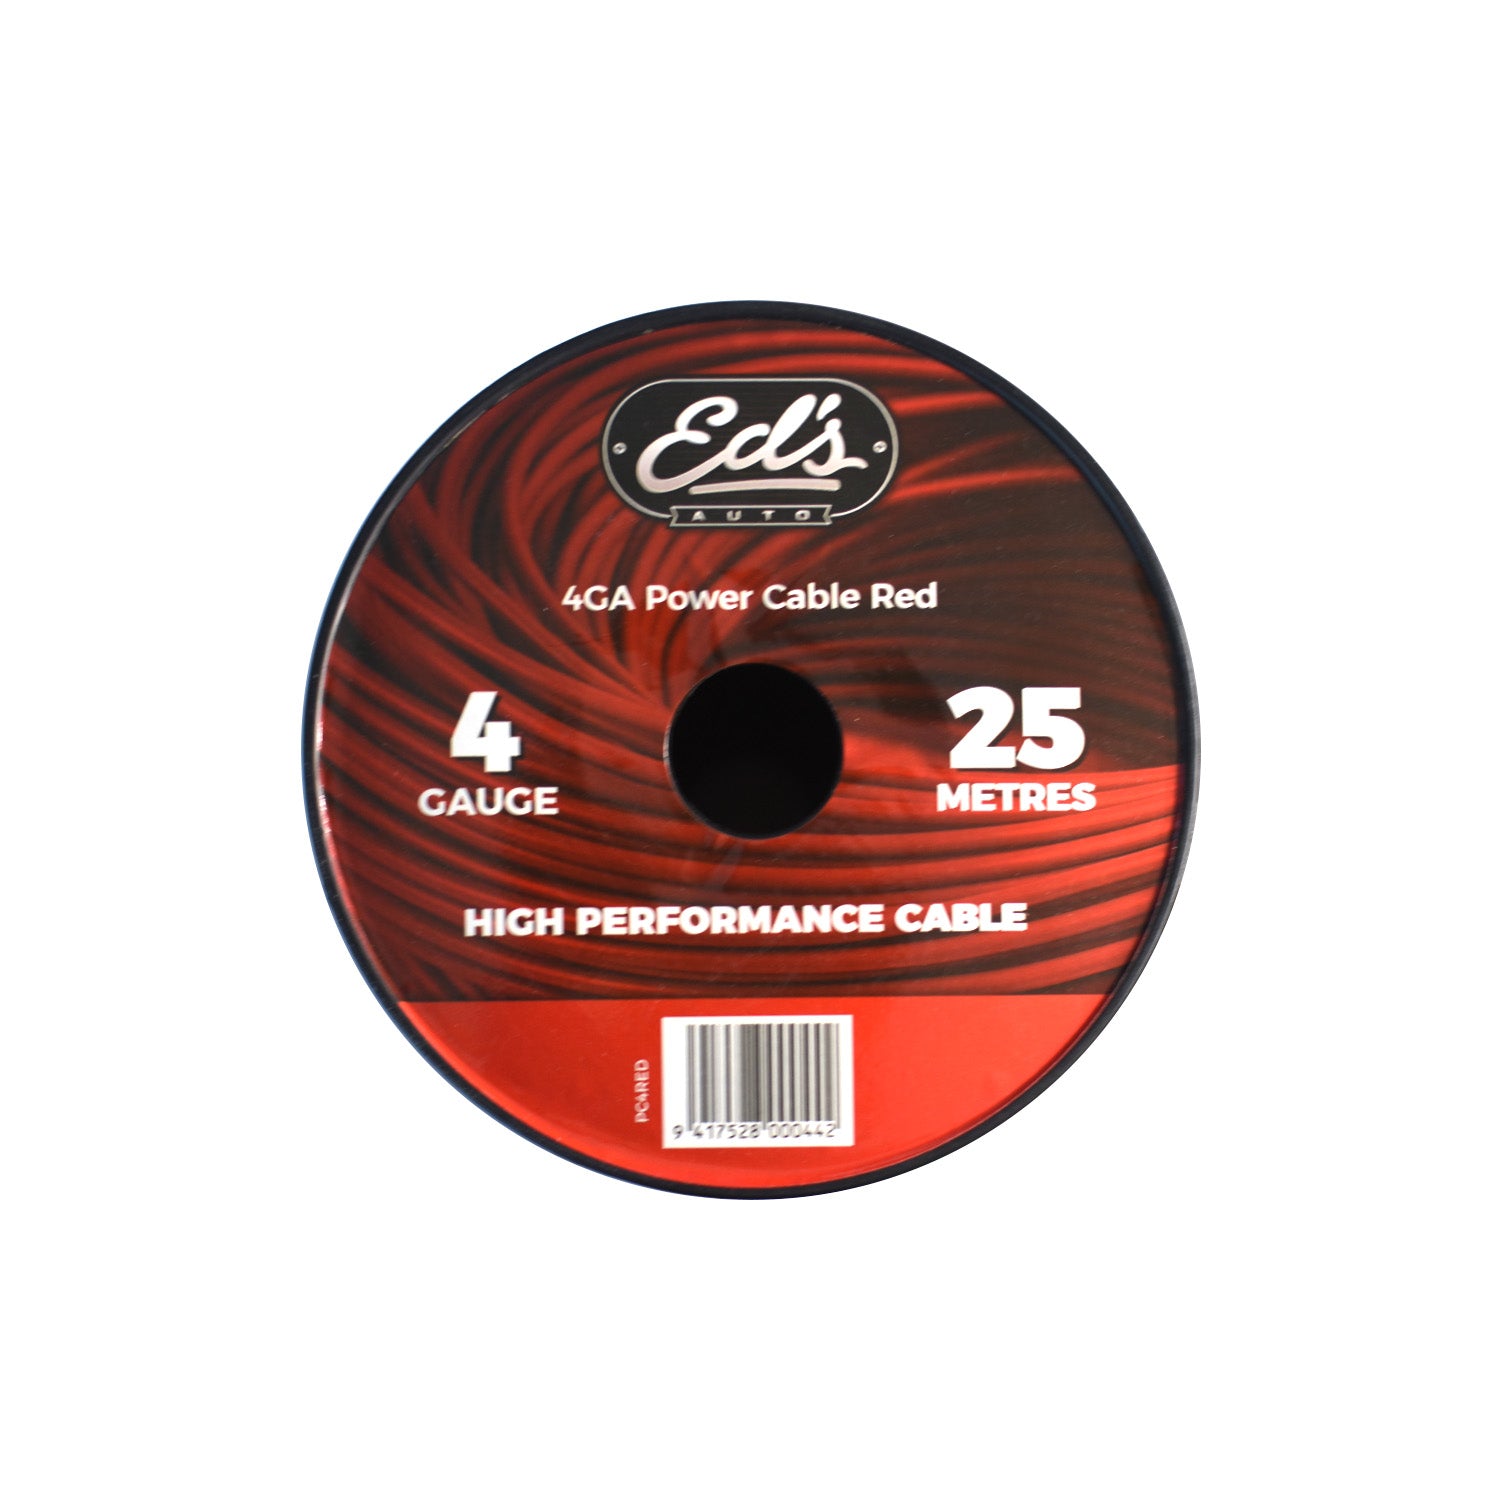 Eds 4 Gauge 21.2Mm2 Cca Power Cable  Matt Flexible Frosted Red 25 Metres